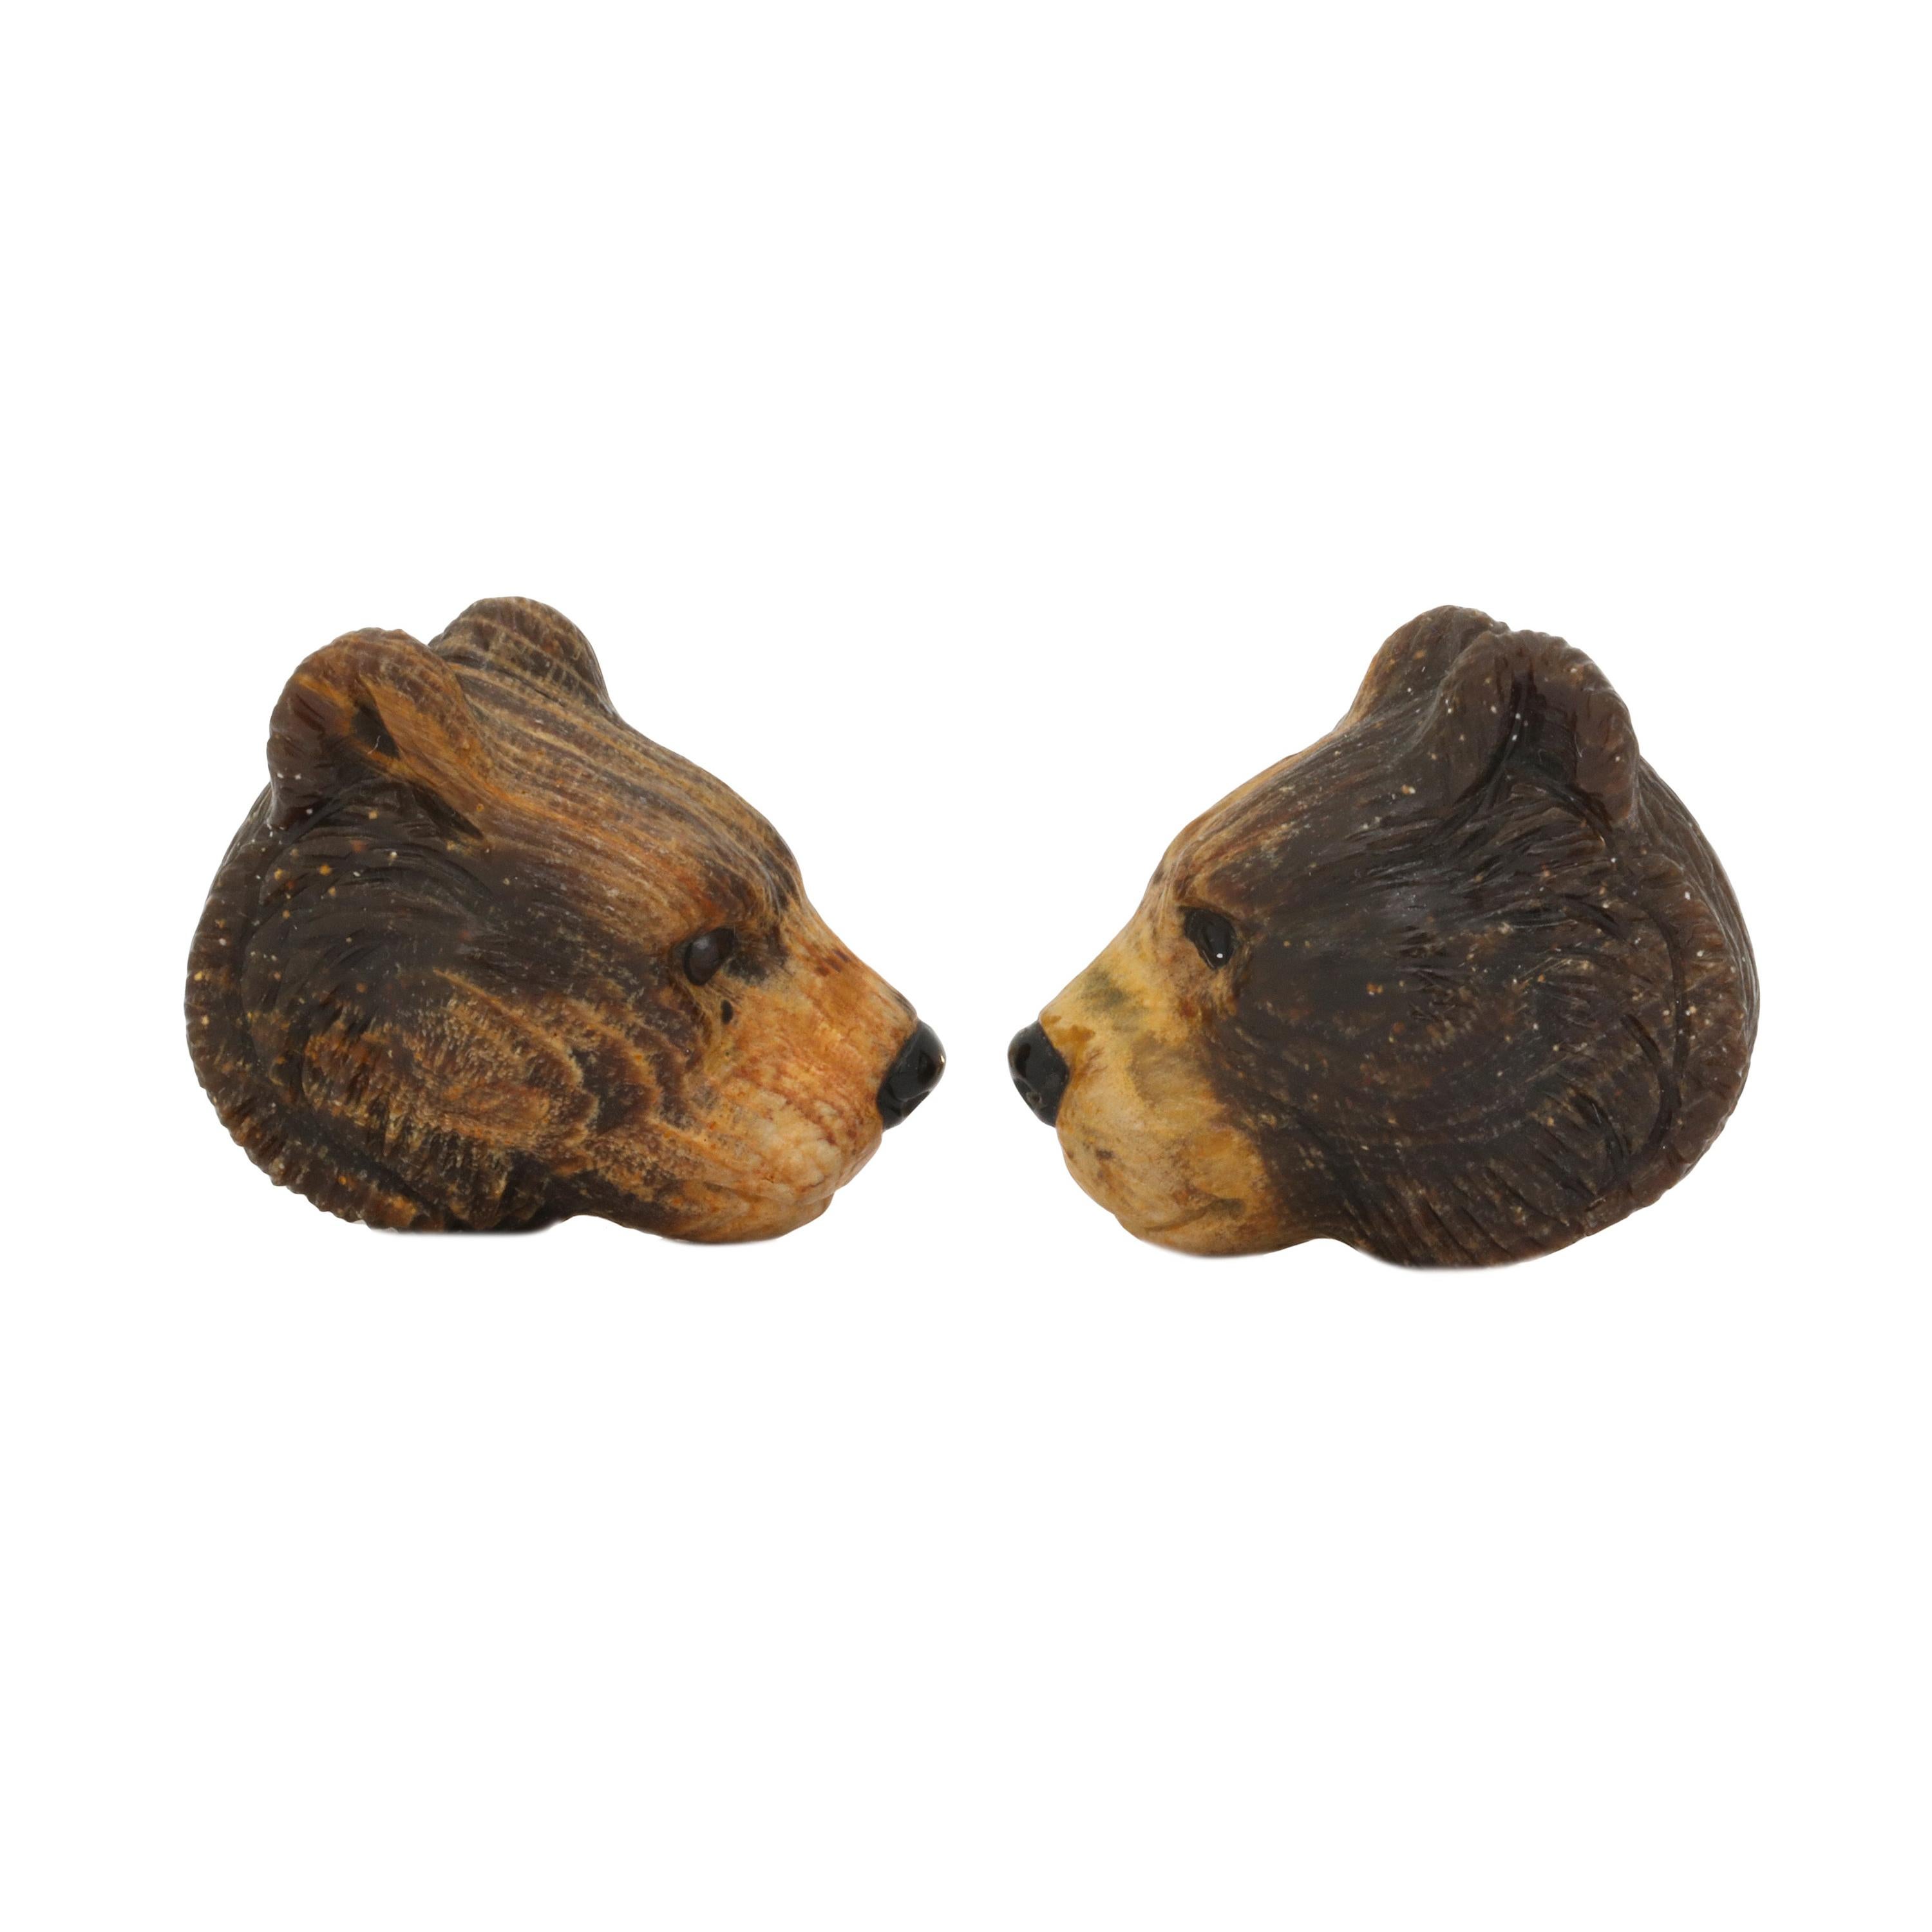 Michael Kanners Finely Carved Bear Cufflinks